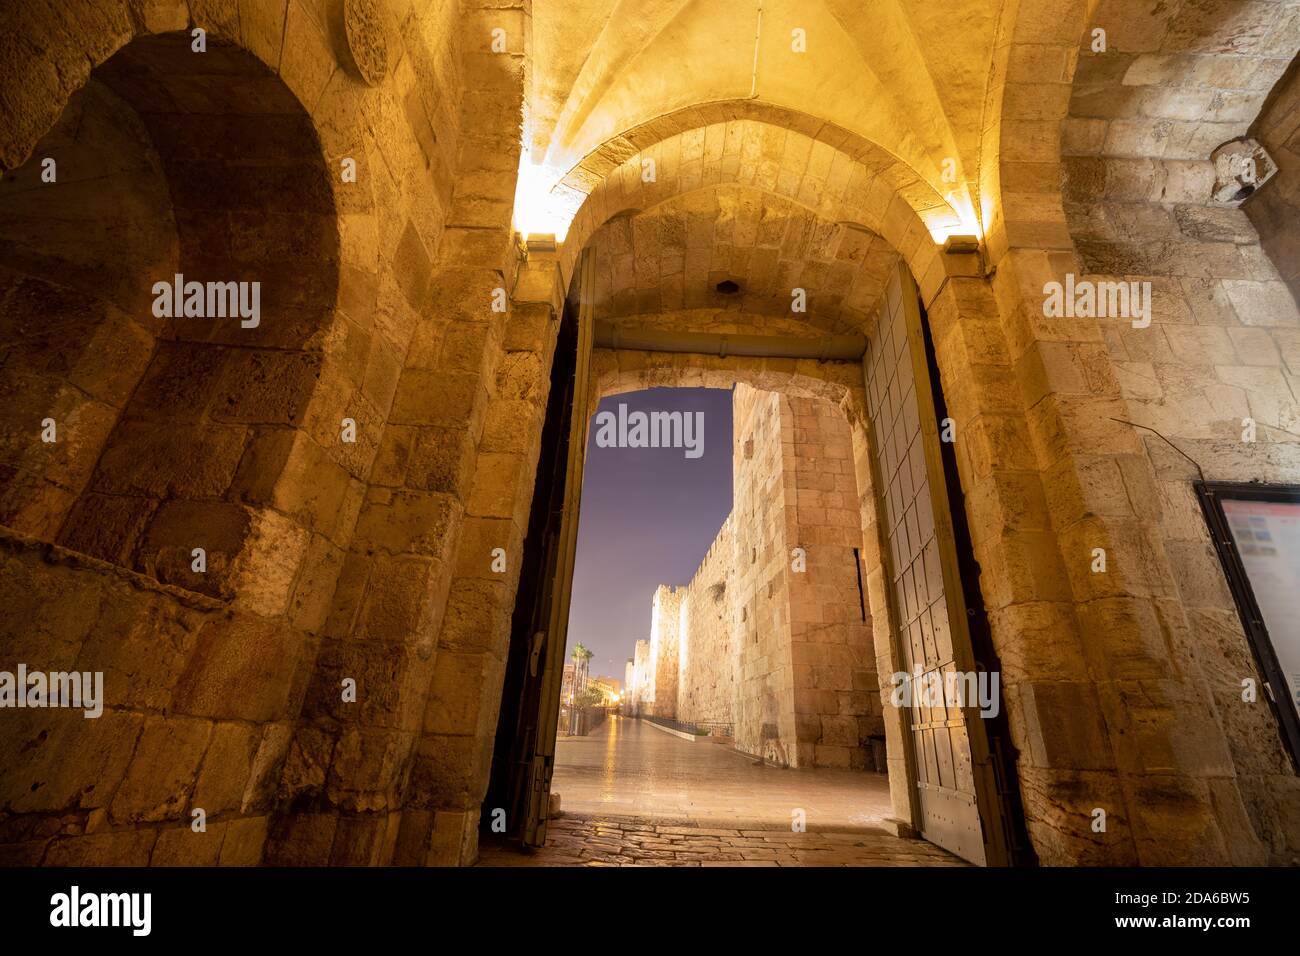 Jaffa Gate in the walls of the Old City of Jerusalem at night, view from inside the wall Stock Photo